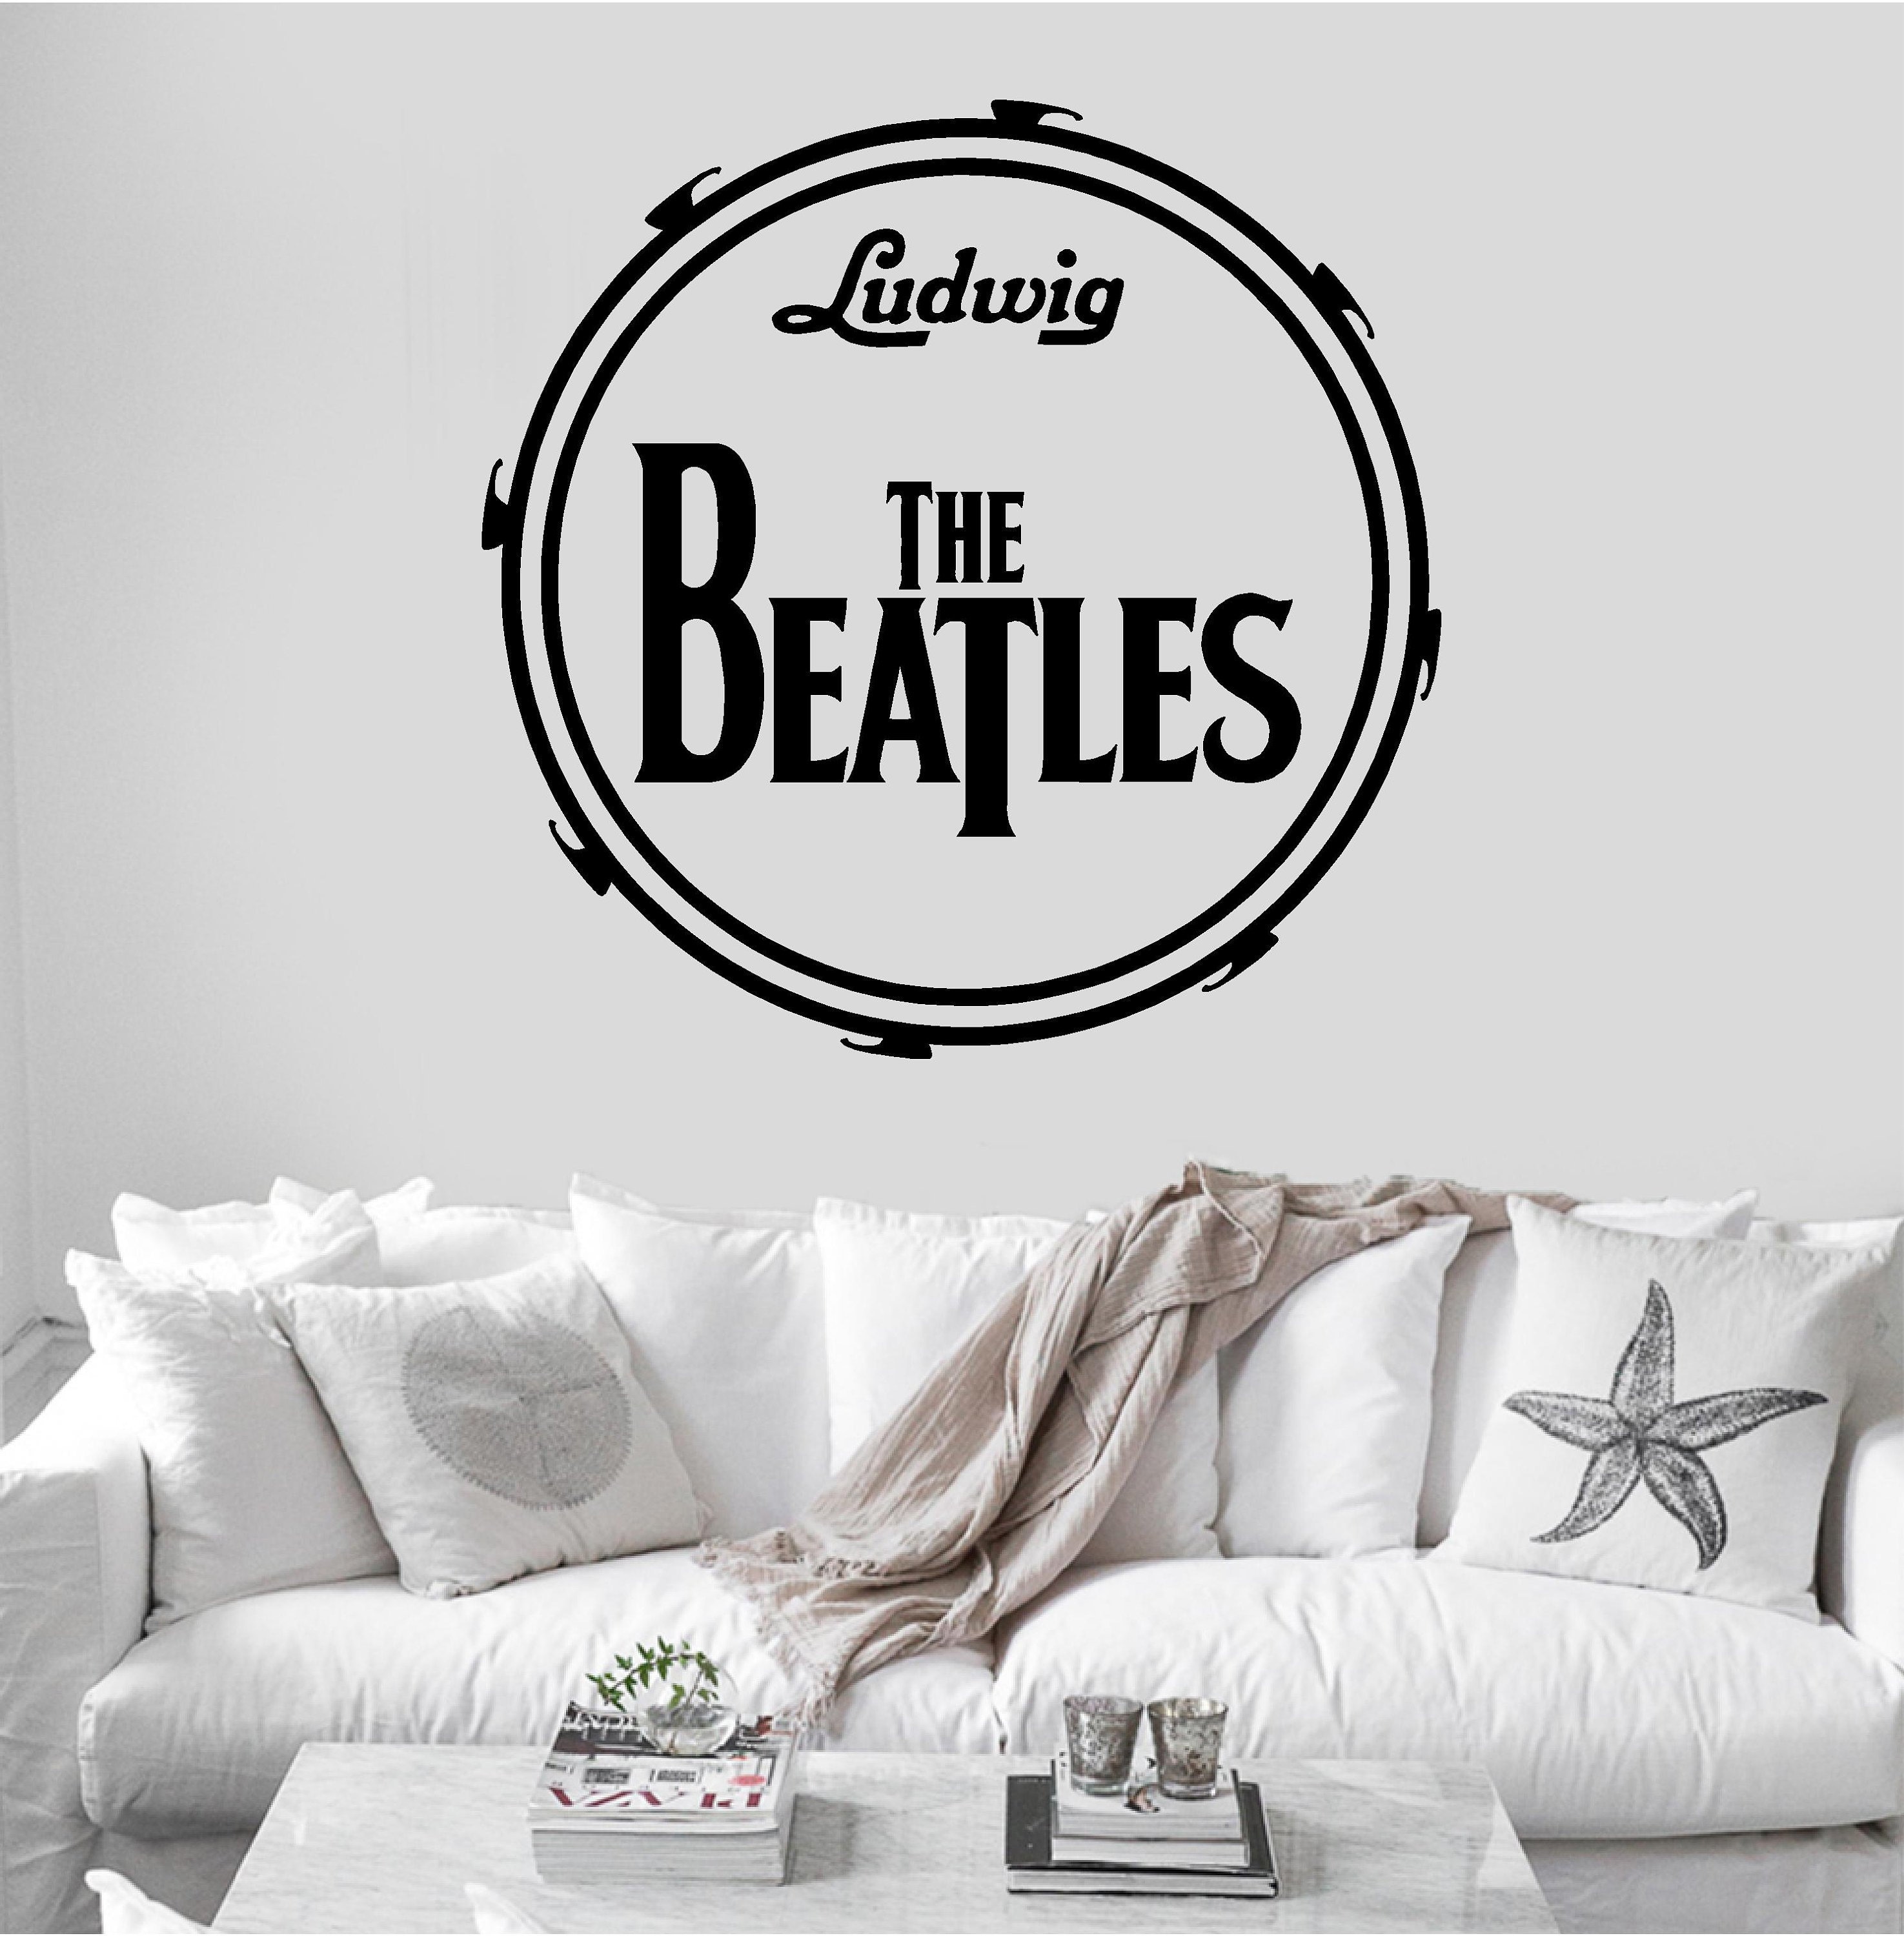 The Beatles Pennyroyal Drum Logo Desk Ornament – The Beatles Official Store